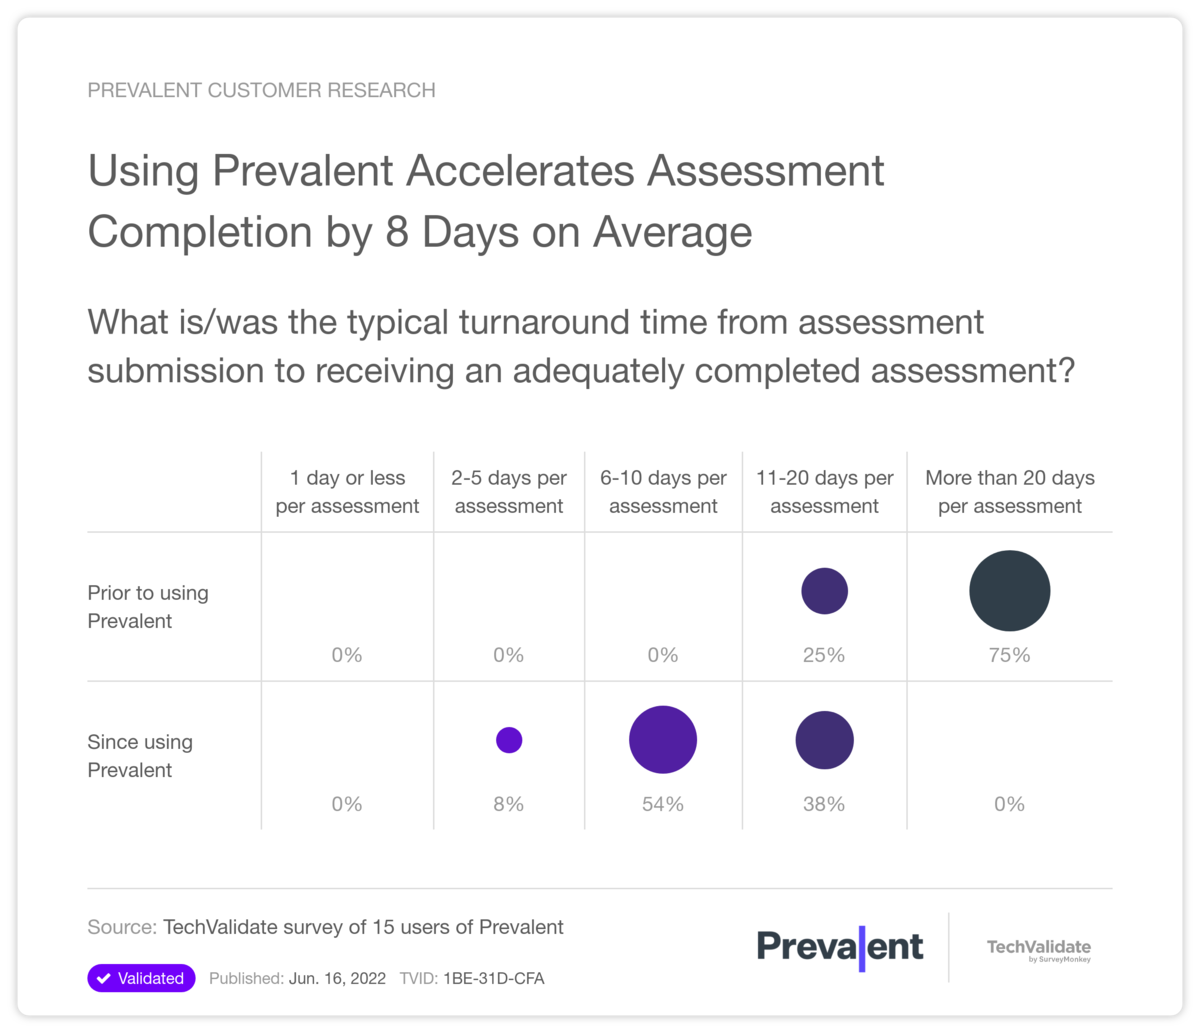 Using Prevalent Accelerates Assessment Completion by 8 Days on Average